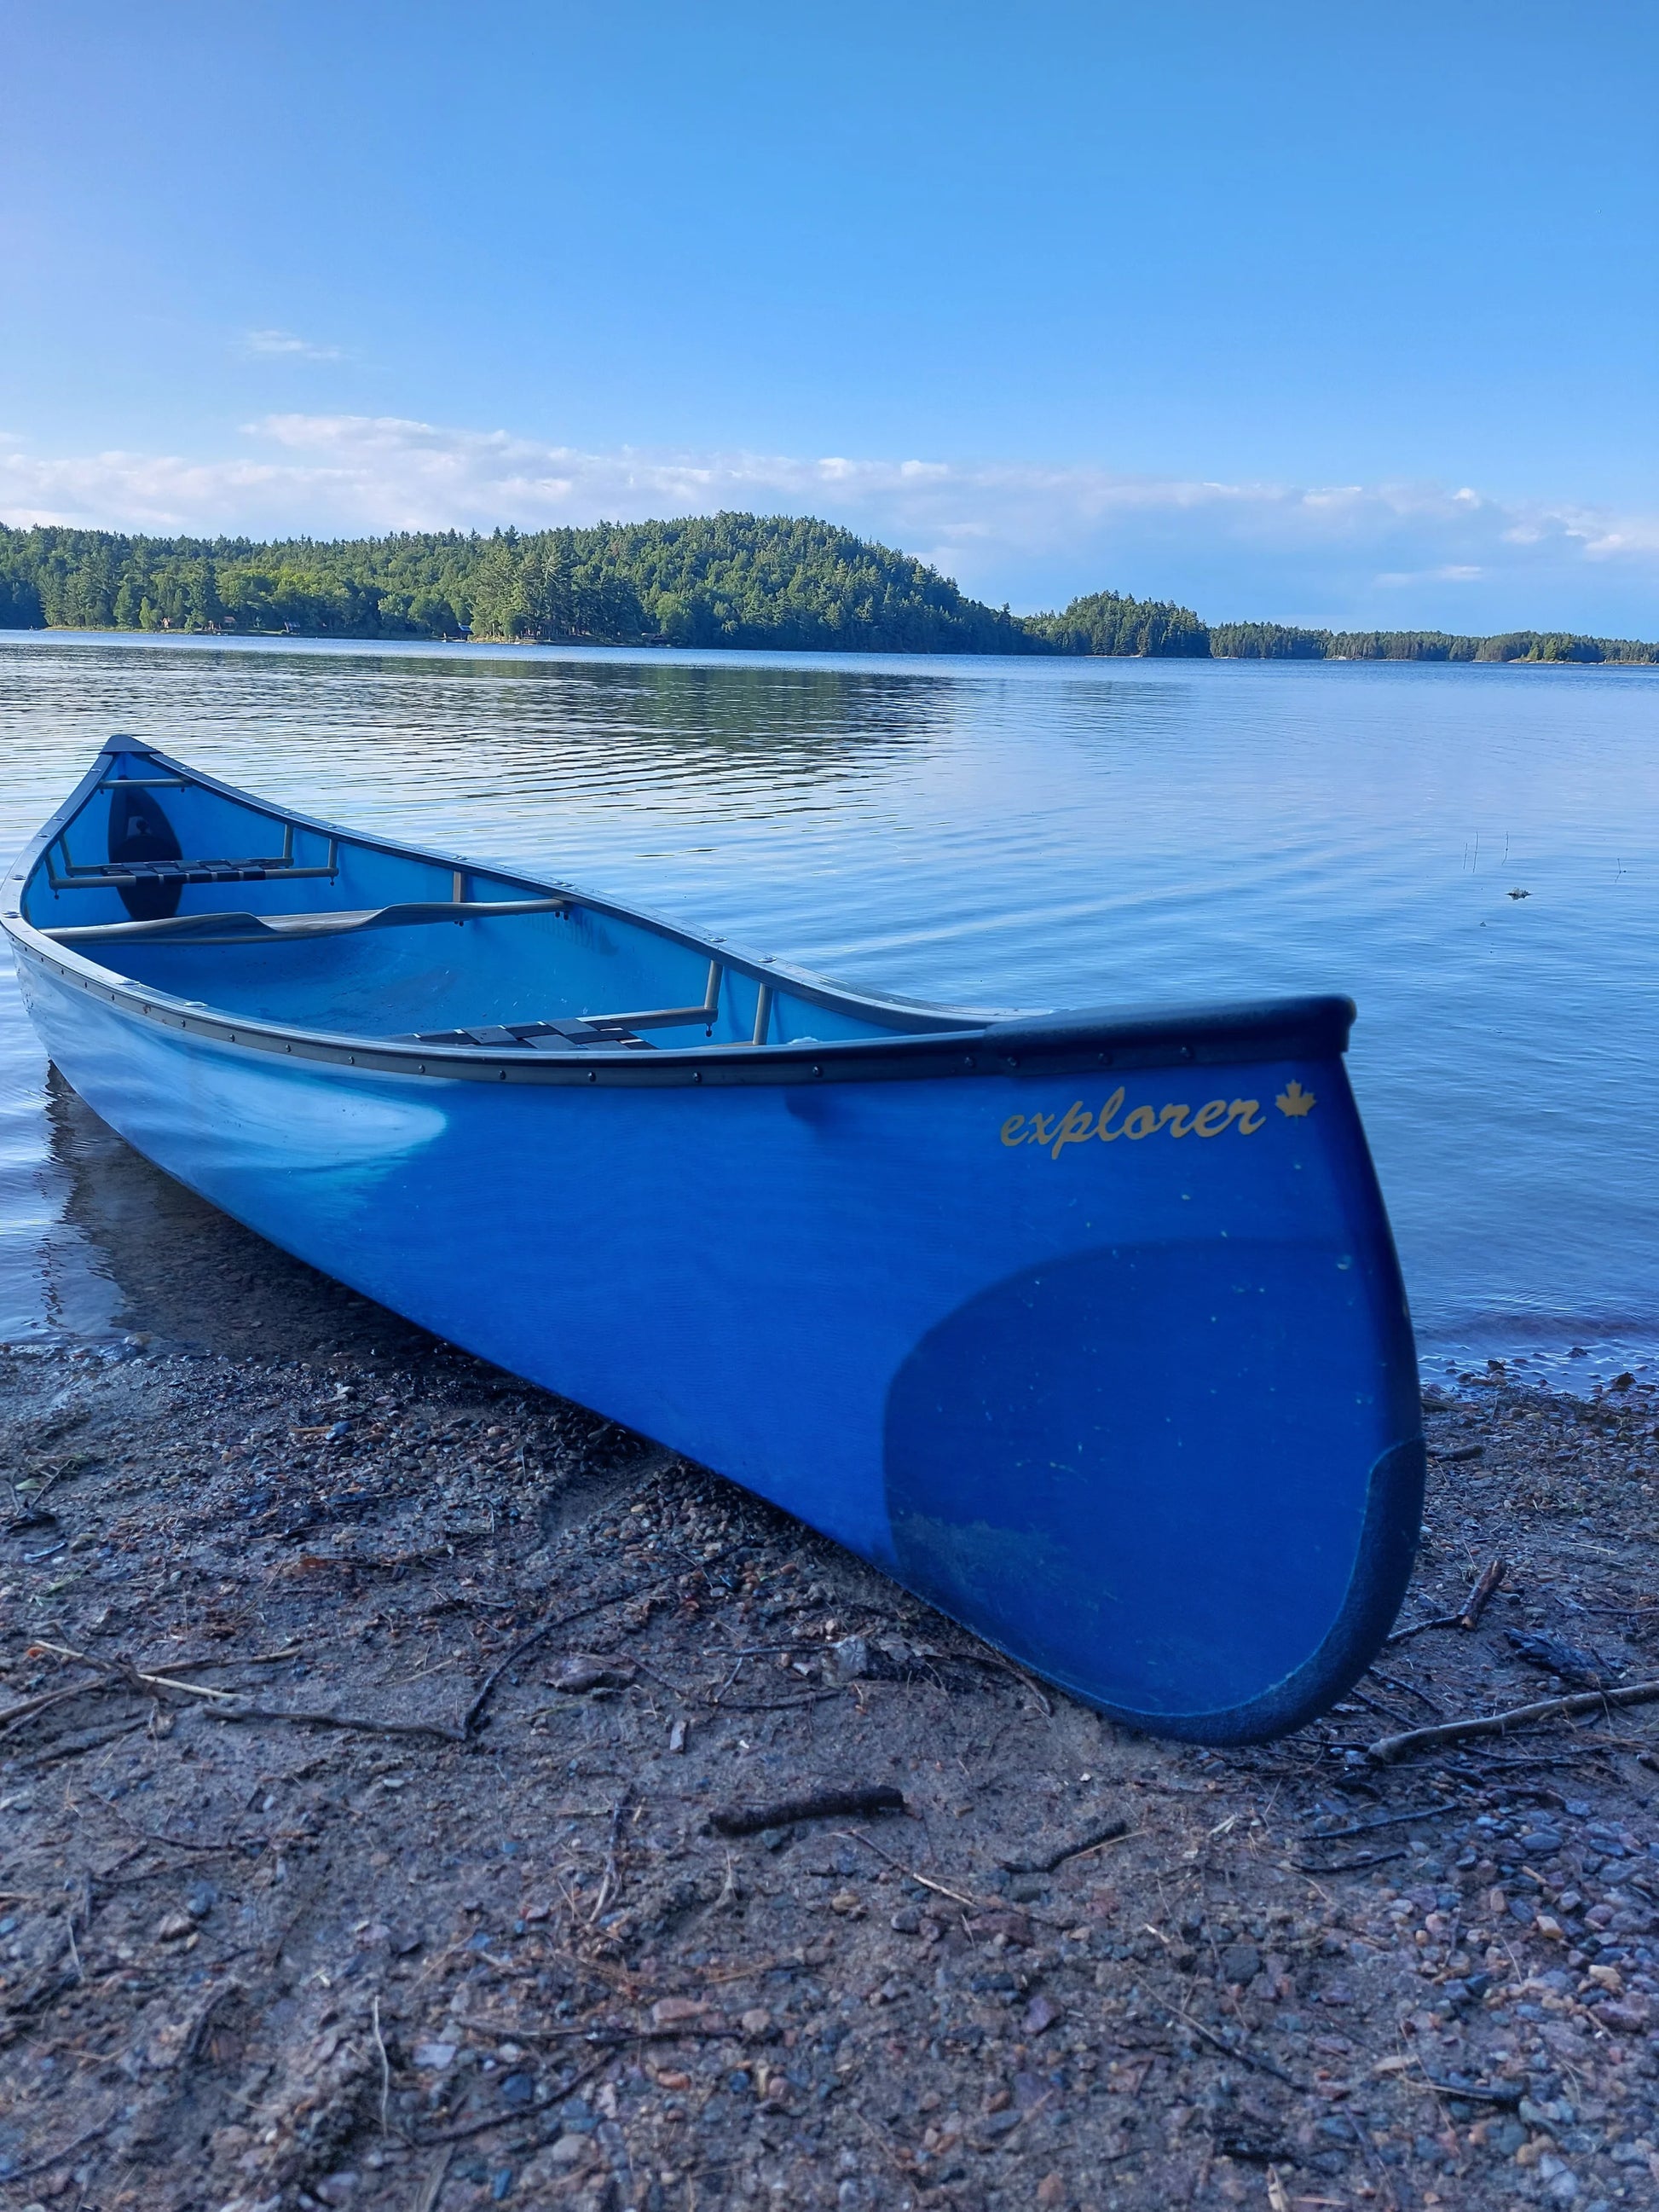 Explore with Ease: Rheaume Fiberglass Canoe Rental - Taking your vacation to the next level.